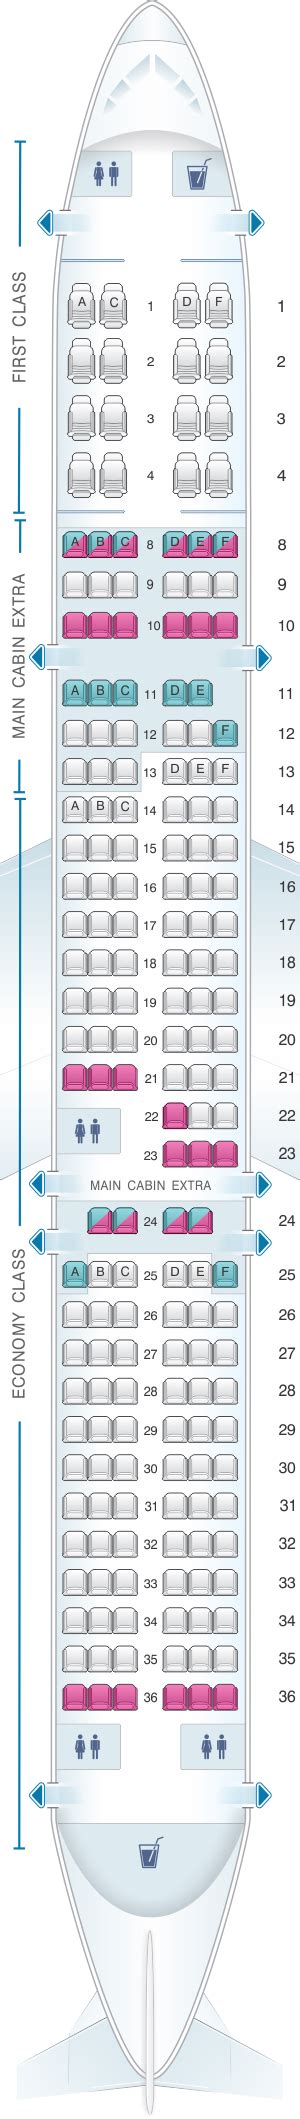 Top airlines. Air France. Delta Airlines. Lufthansa. Turkish Airlines. United Airlines. All Seat Maps. Detailed seat map American Airlines Boeing B777 200ER 273pax. Find the best airplanes seats, information on legroom, recline and in-flight entertainment using our detailed online seating charts.. 